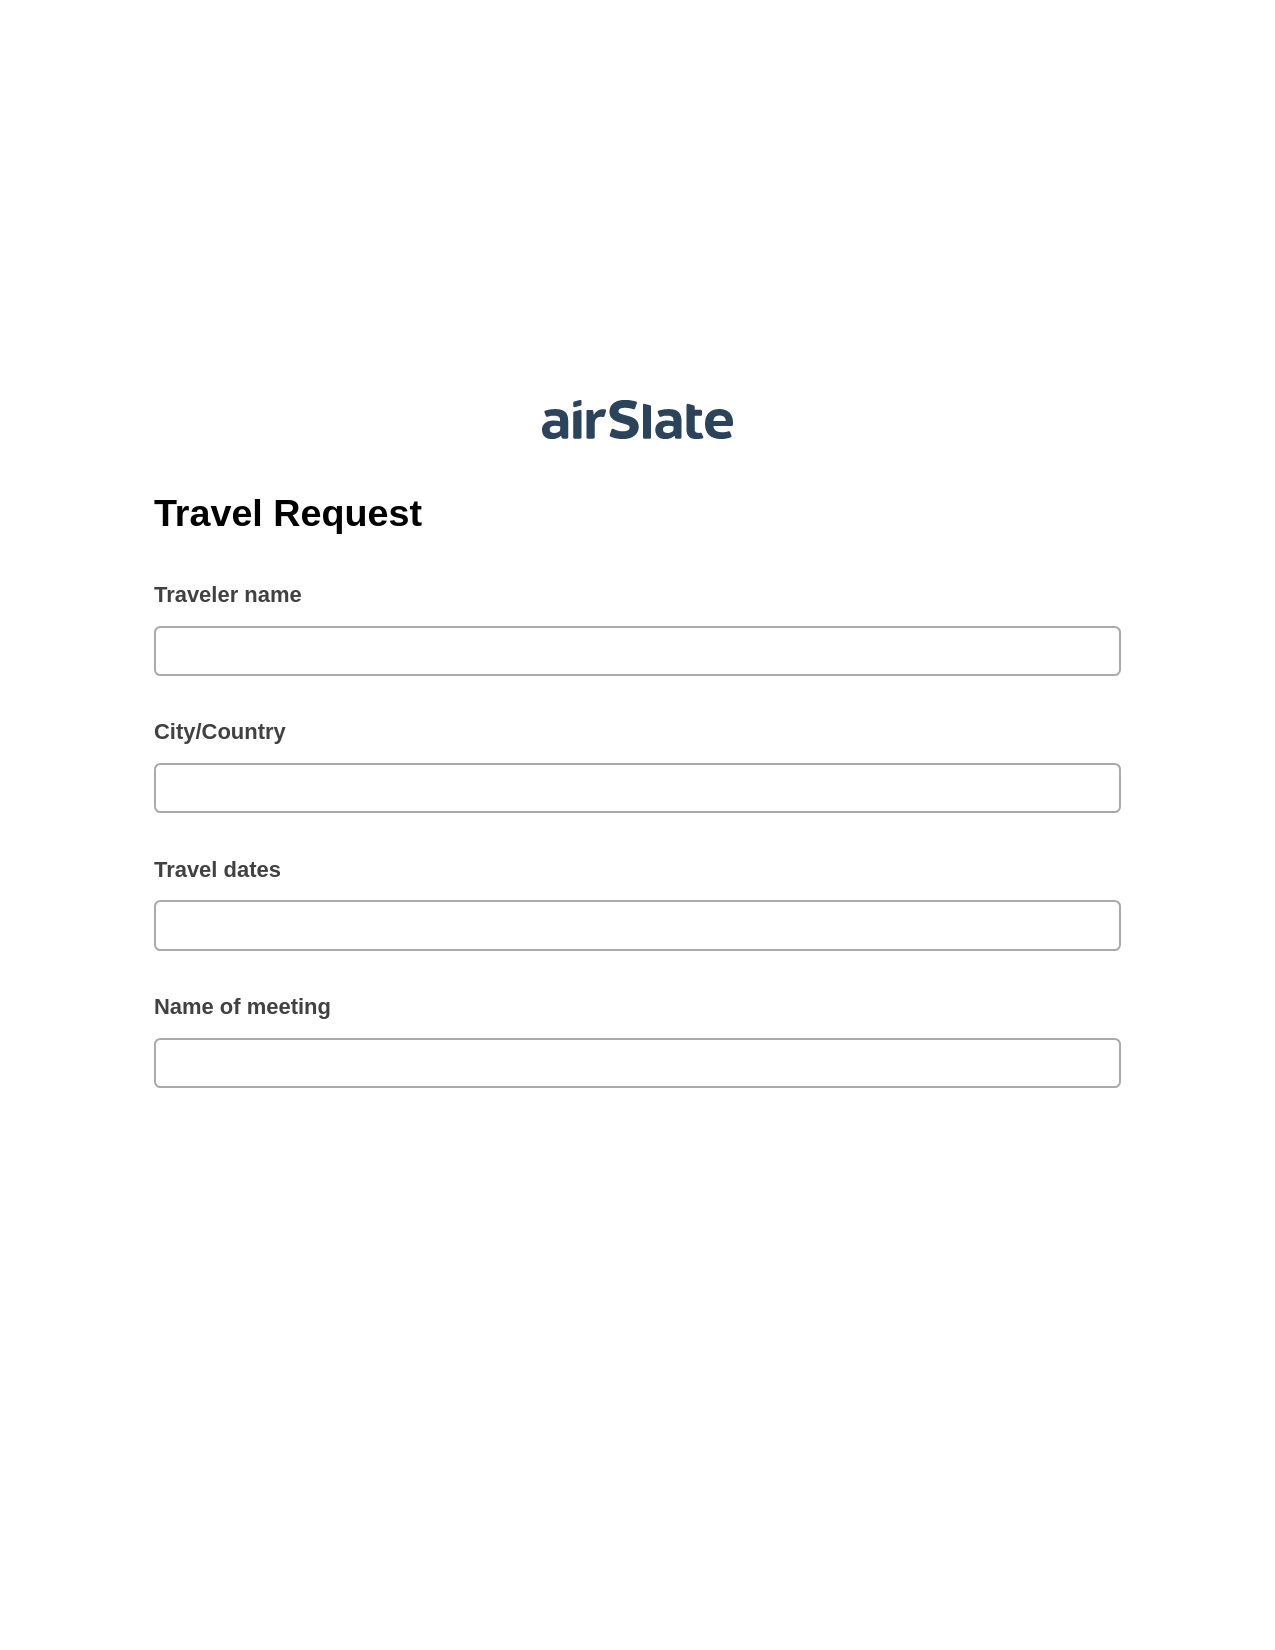 Travel Request Pre-fill from CSV File Bot, Unassign Role Bot, Export to Salesforce Bot